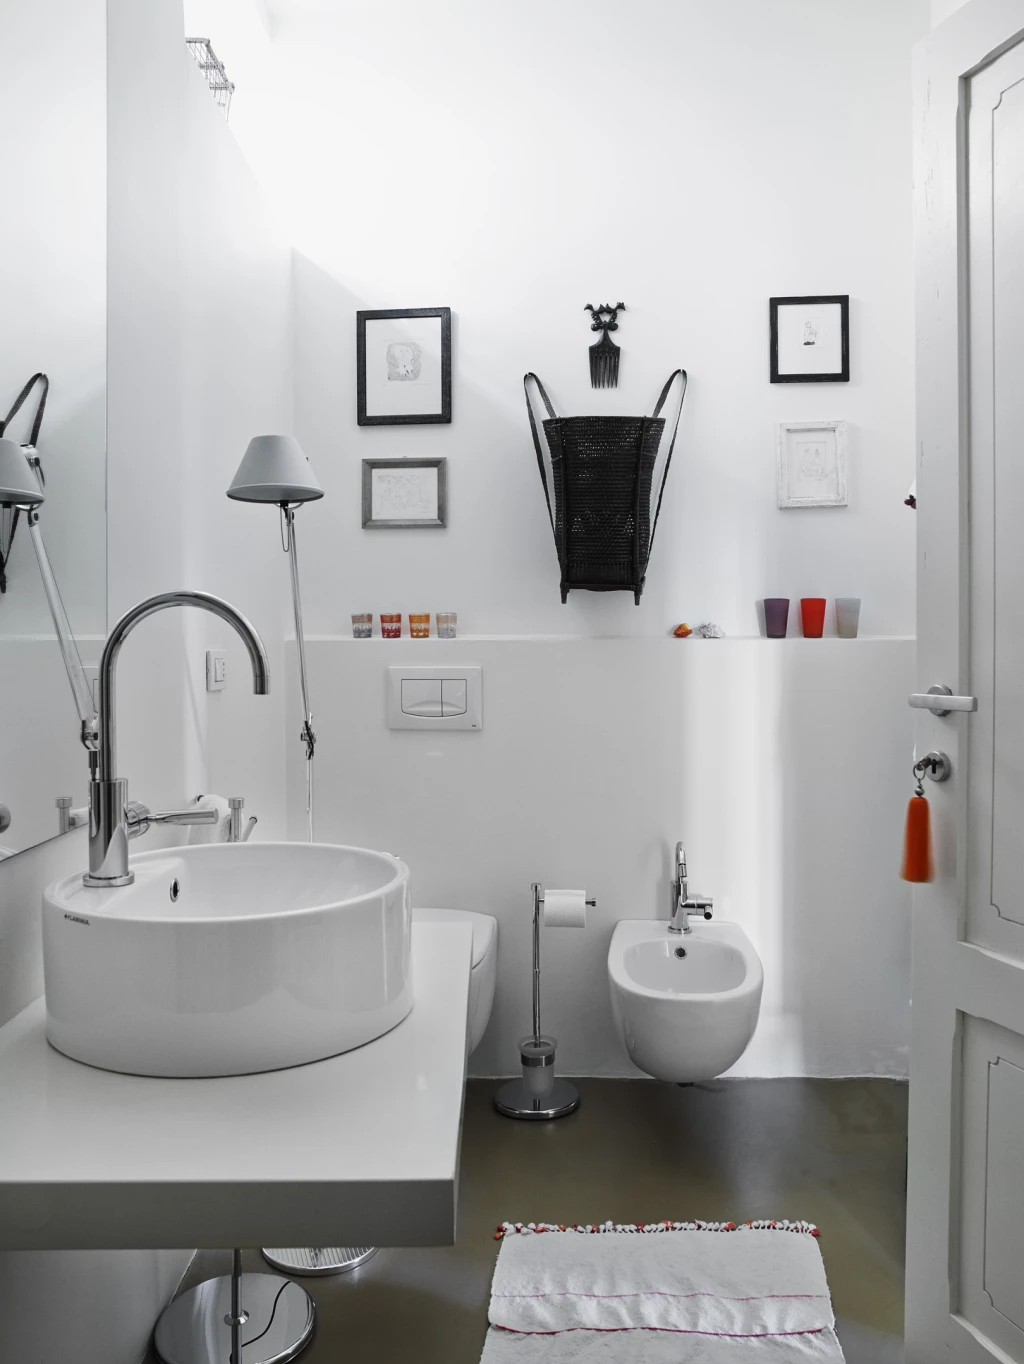 A very comfortable and compact bathroom design